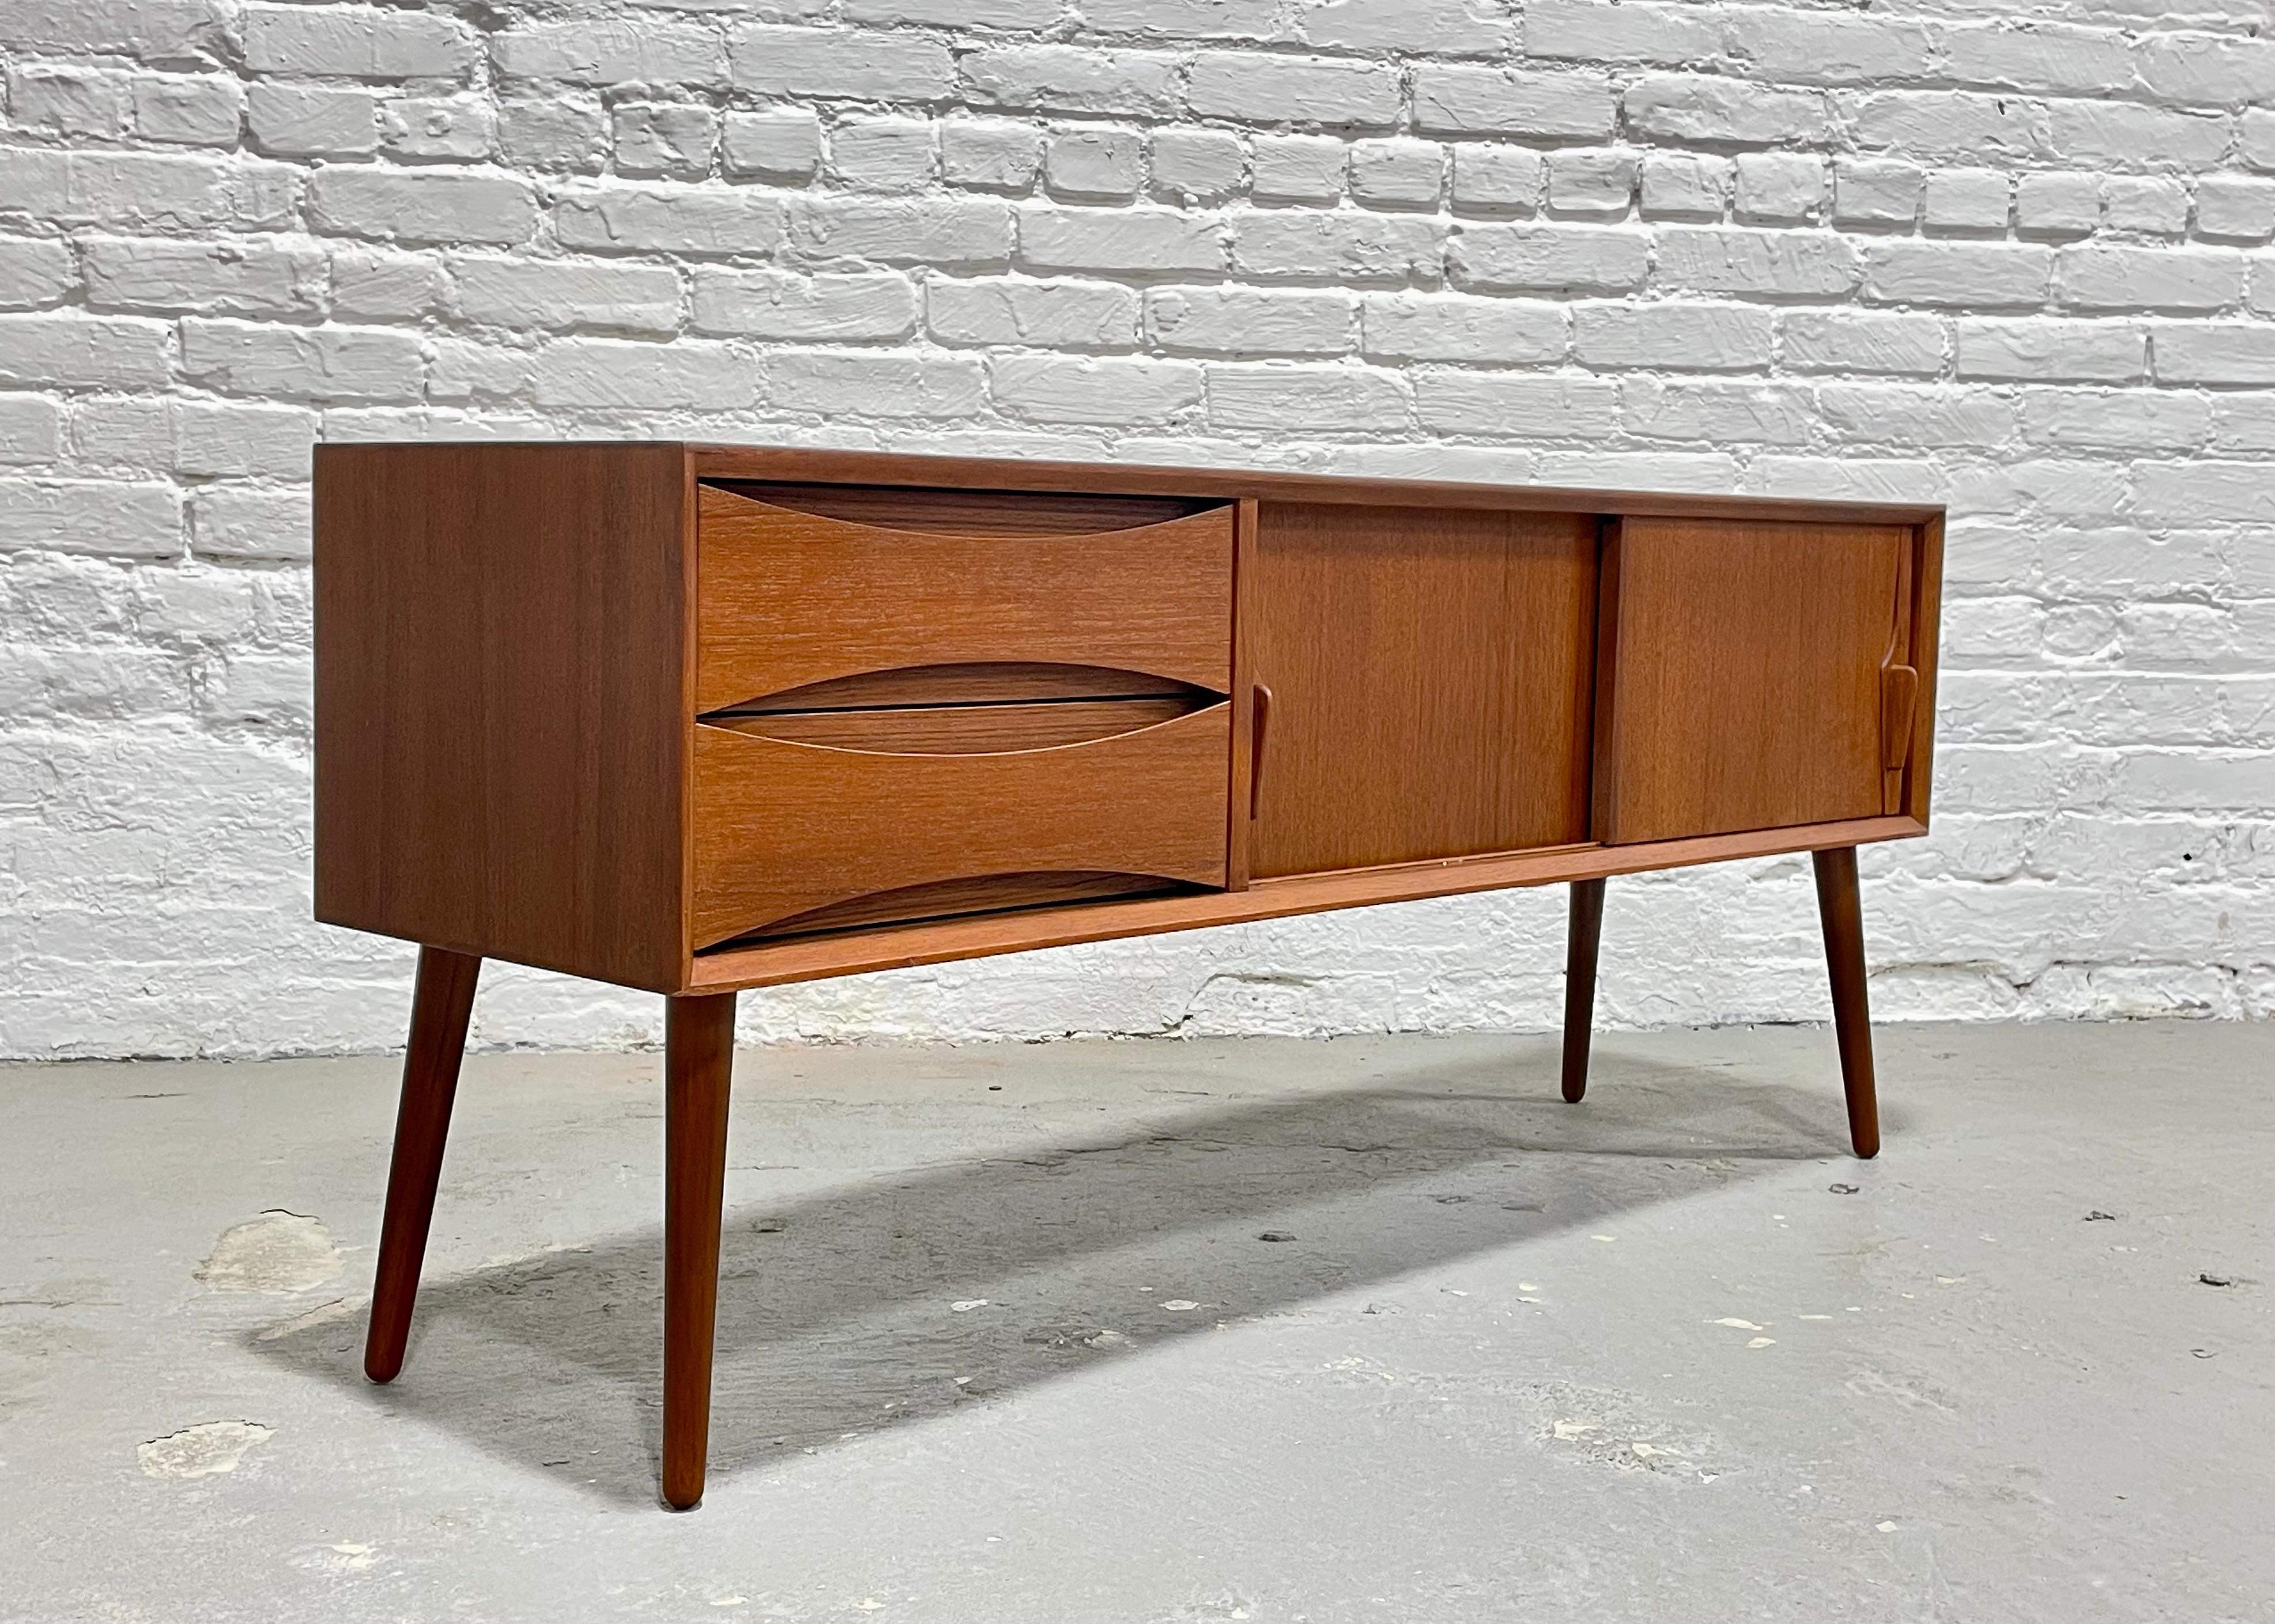 Mid-Century Modern styled Petite Credenza / console in a perfectly tailored extra small apartment Size. Please confirm measurements - the piece is smaller than it appears in the pictures and is NOT a full Size credenza. This lovely piece has two